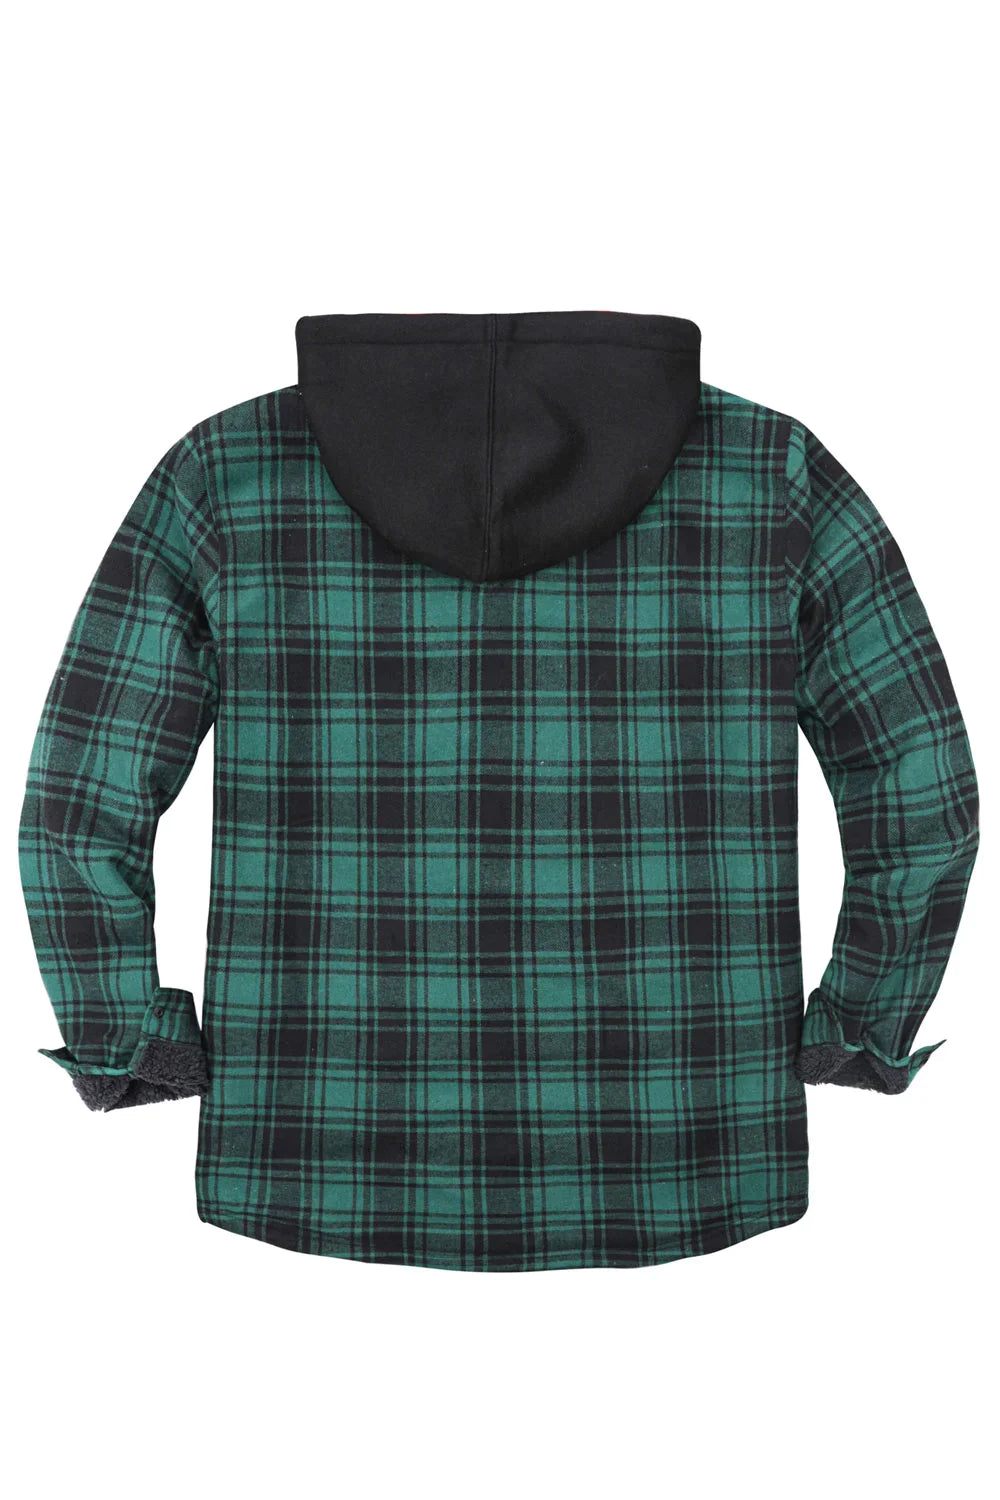 Matching Family Outfits - Men's Green Plaid Zip Up Hooded Jacket ...